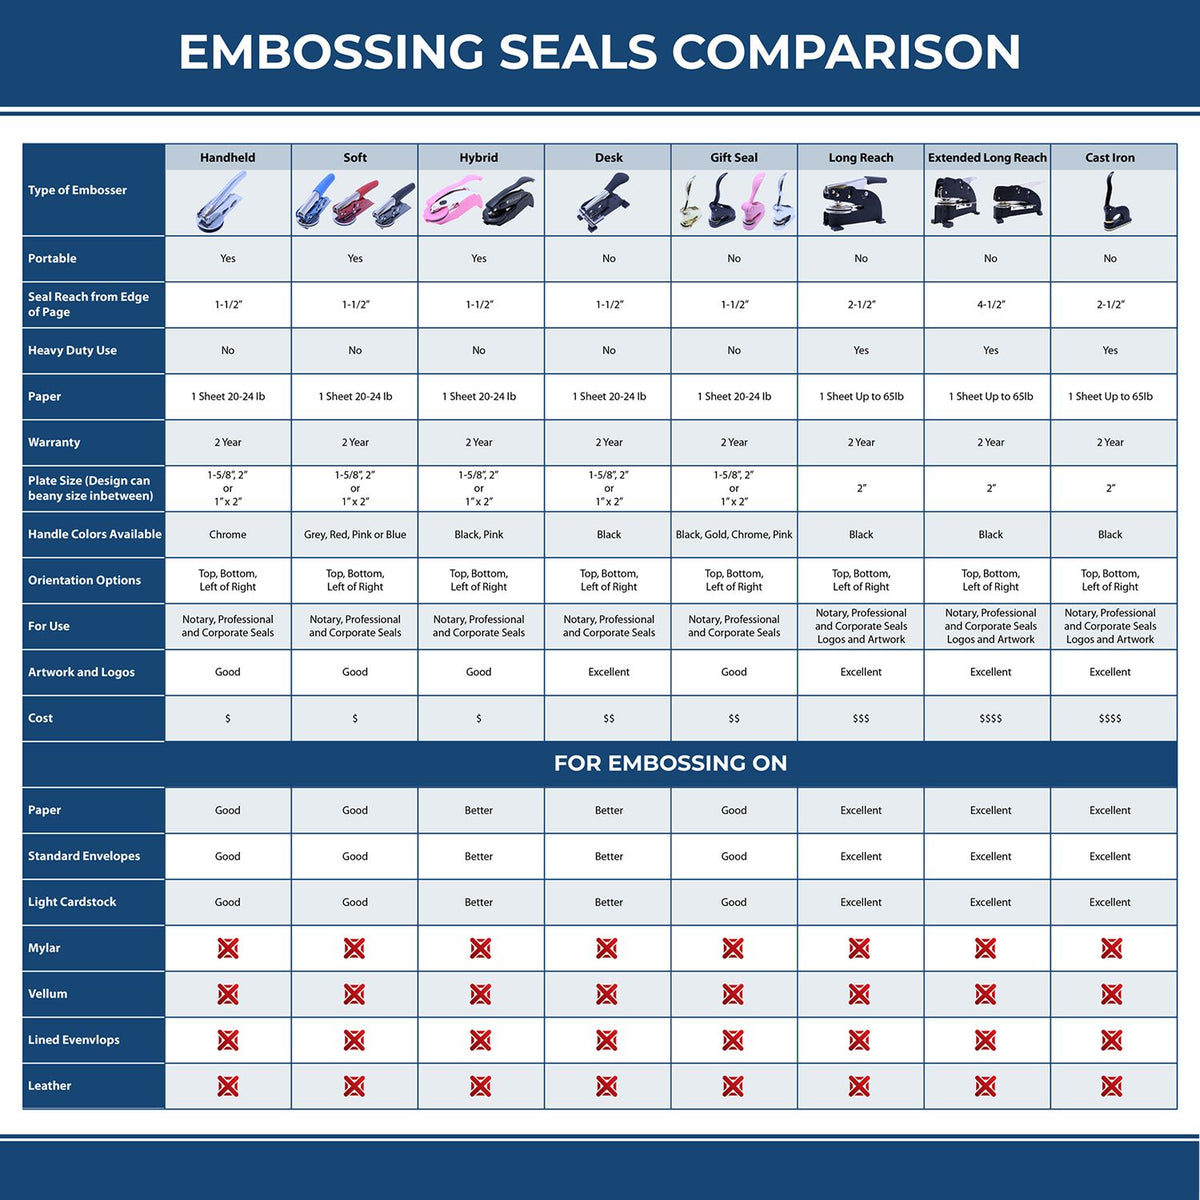 A comparison chart for the different types of mount models available for the Heavy Duty Cast Iron Delaware Land Surveyor Seal Embosser.